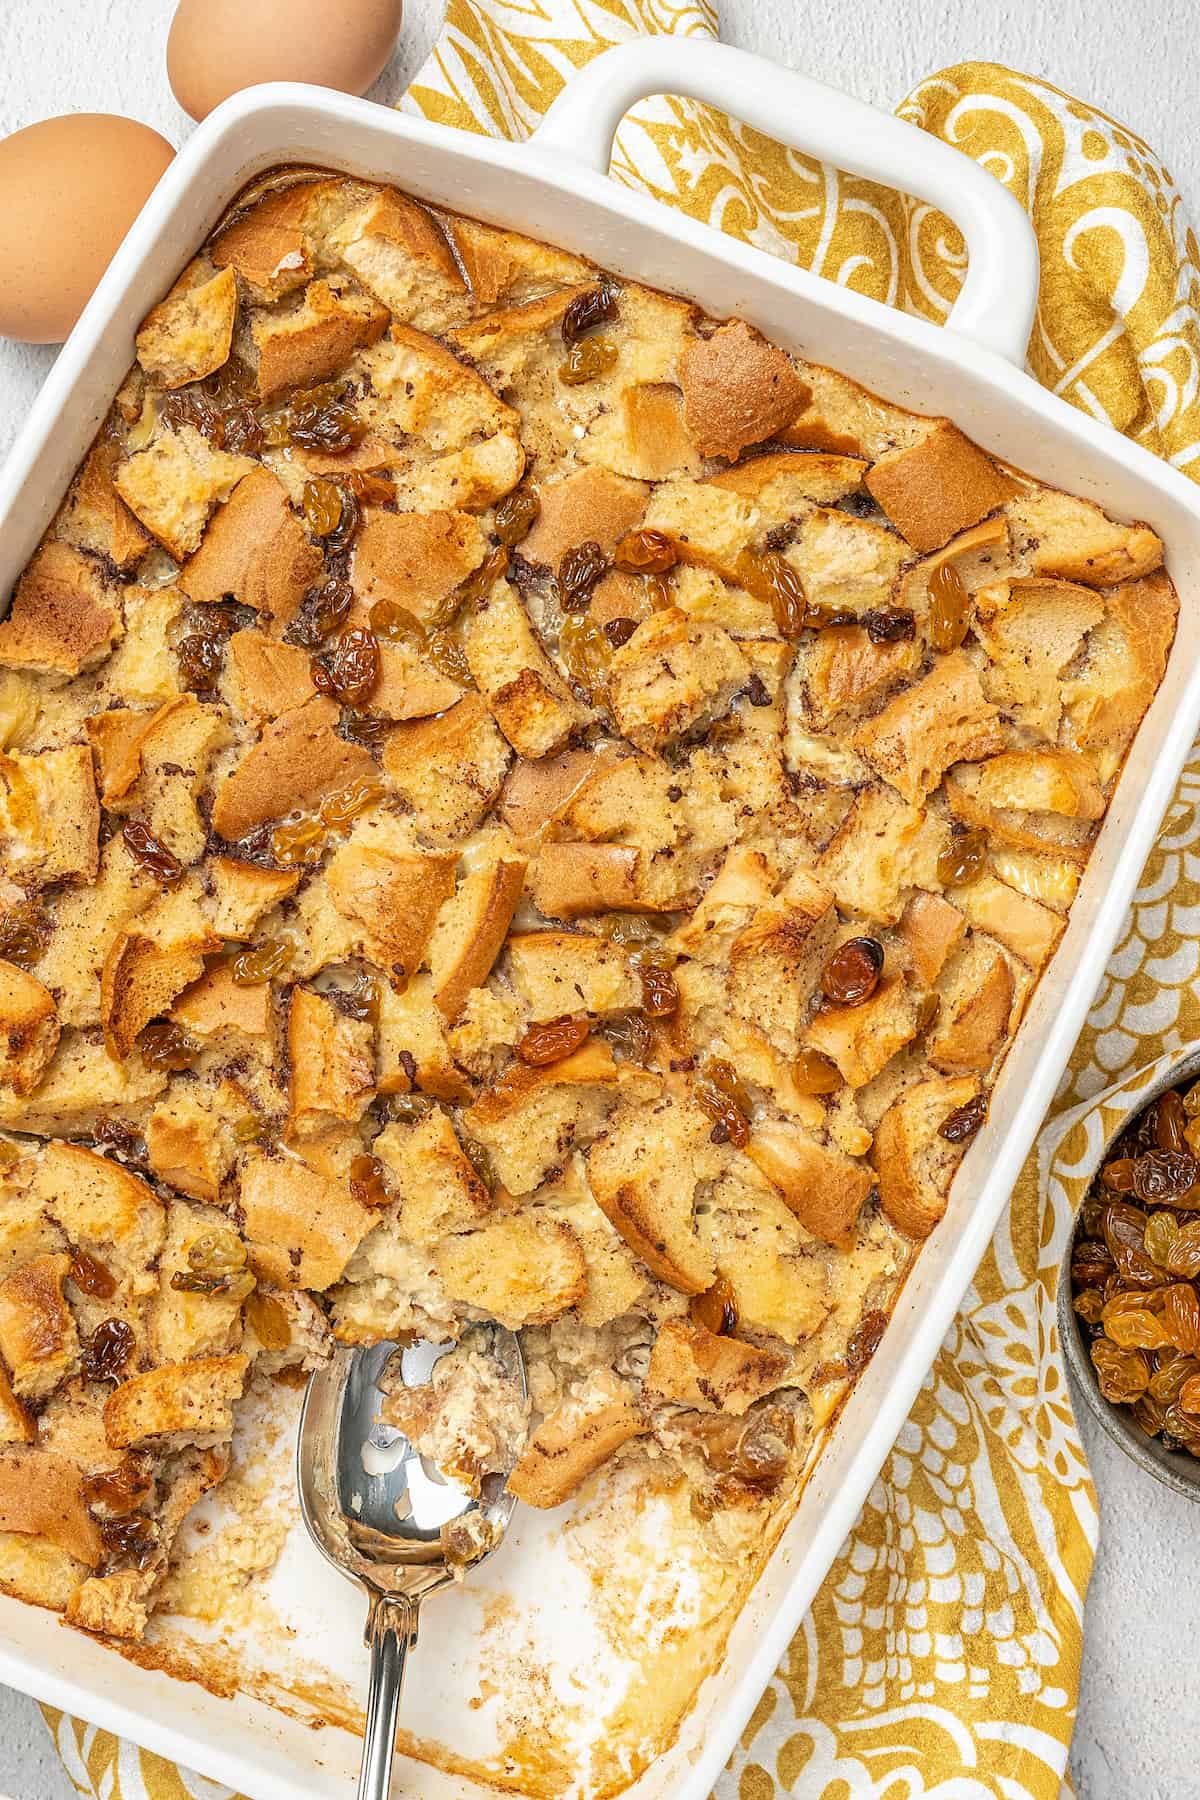 Gluten-free bread pudding in a baking dish with a serving missing.